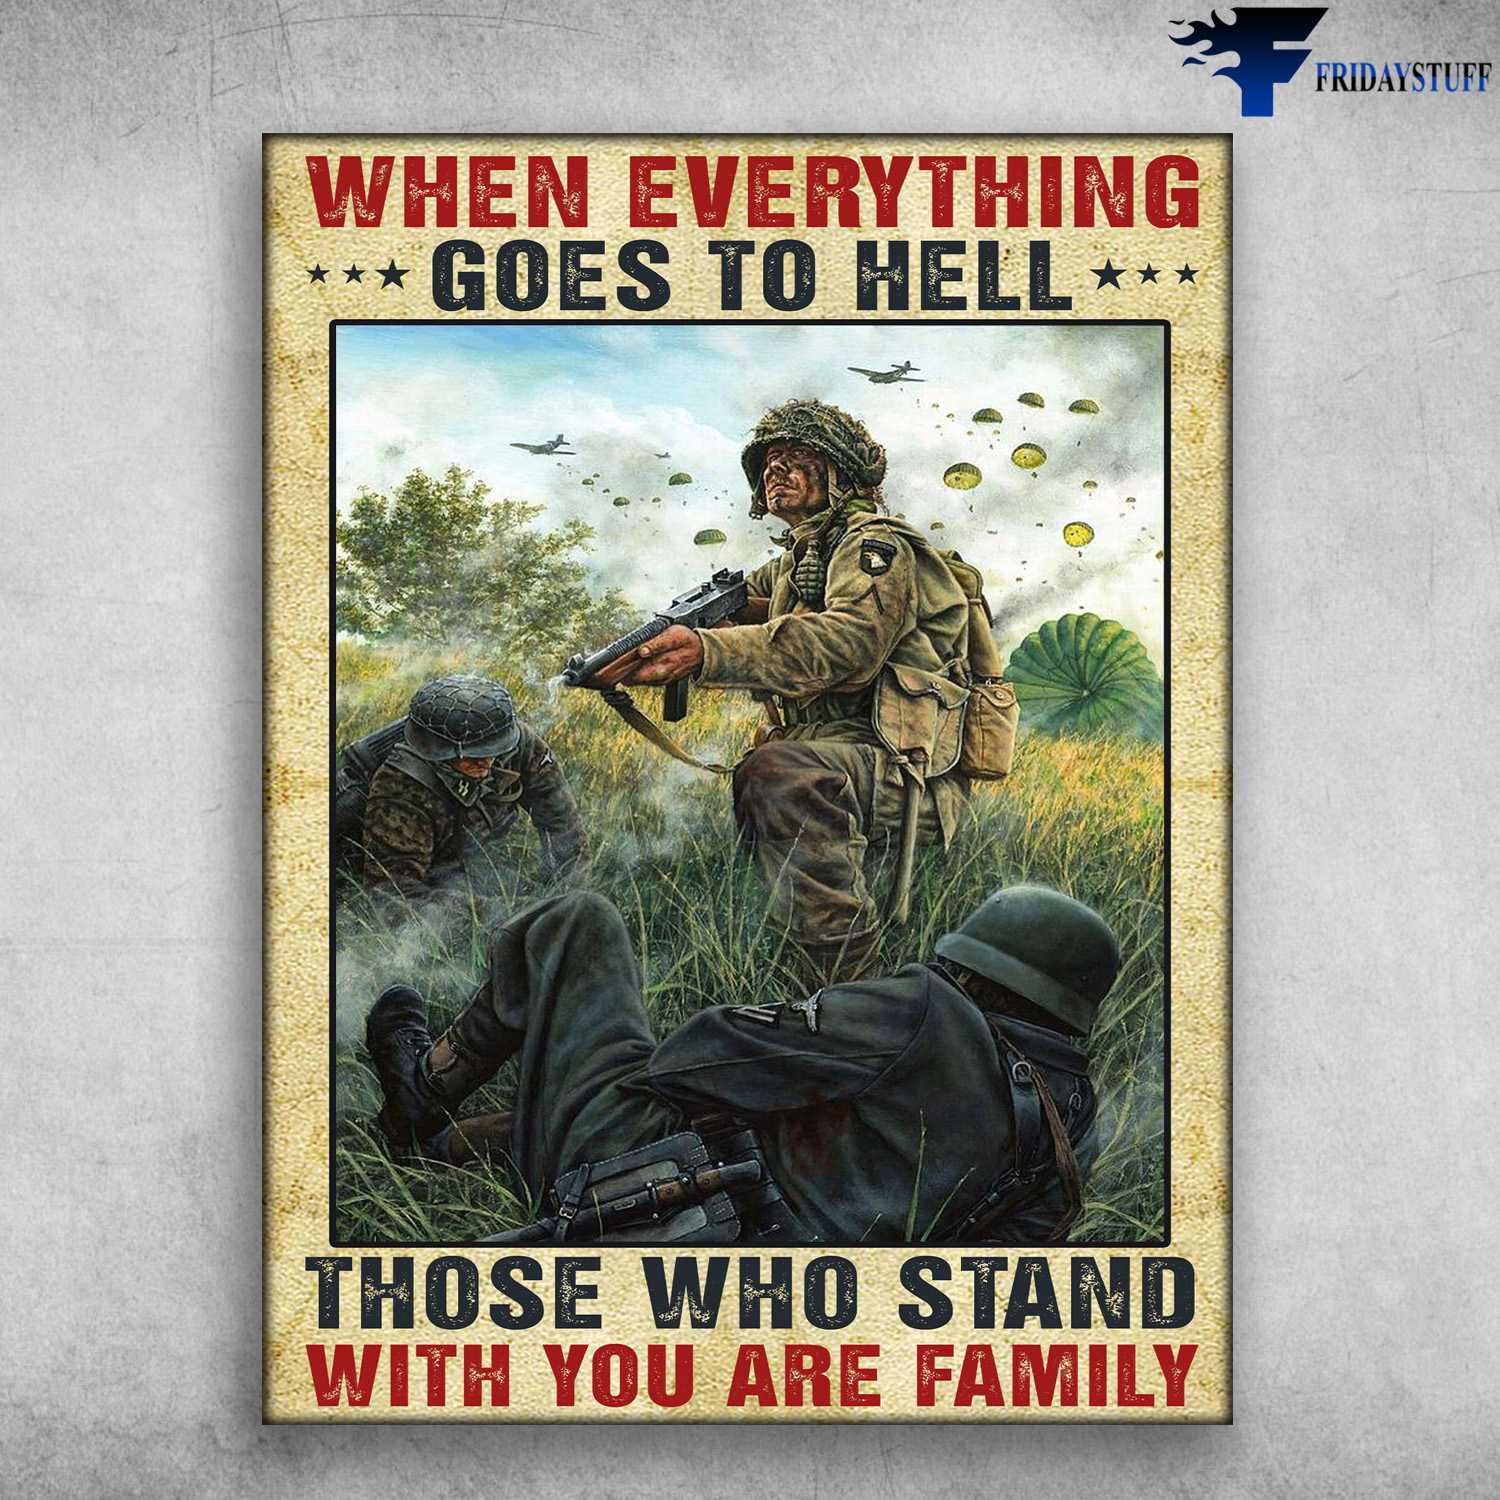 War Poster, Soldier On Battlefield - When Everything Goes To Hell, Those Who Stand, With You Are Family